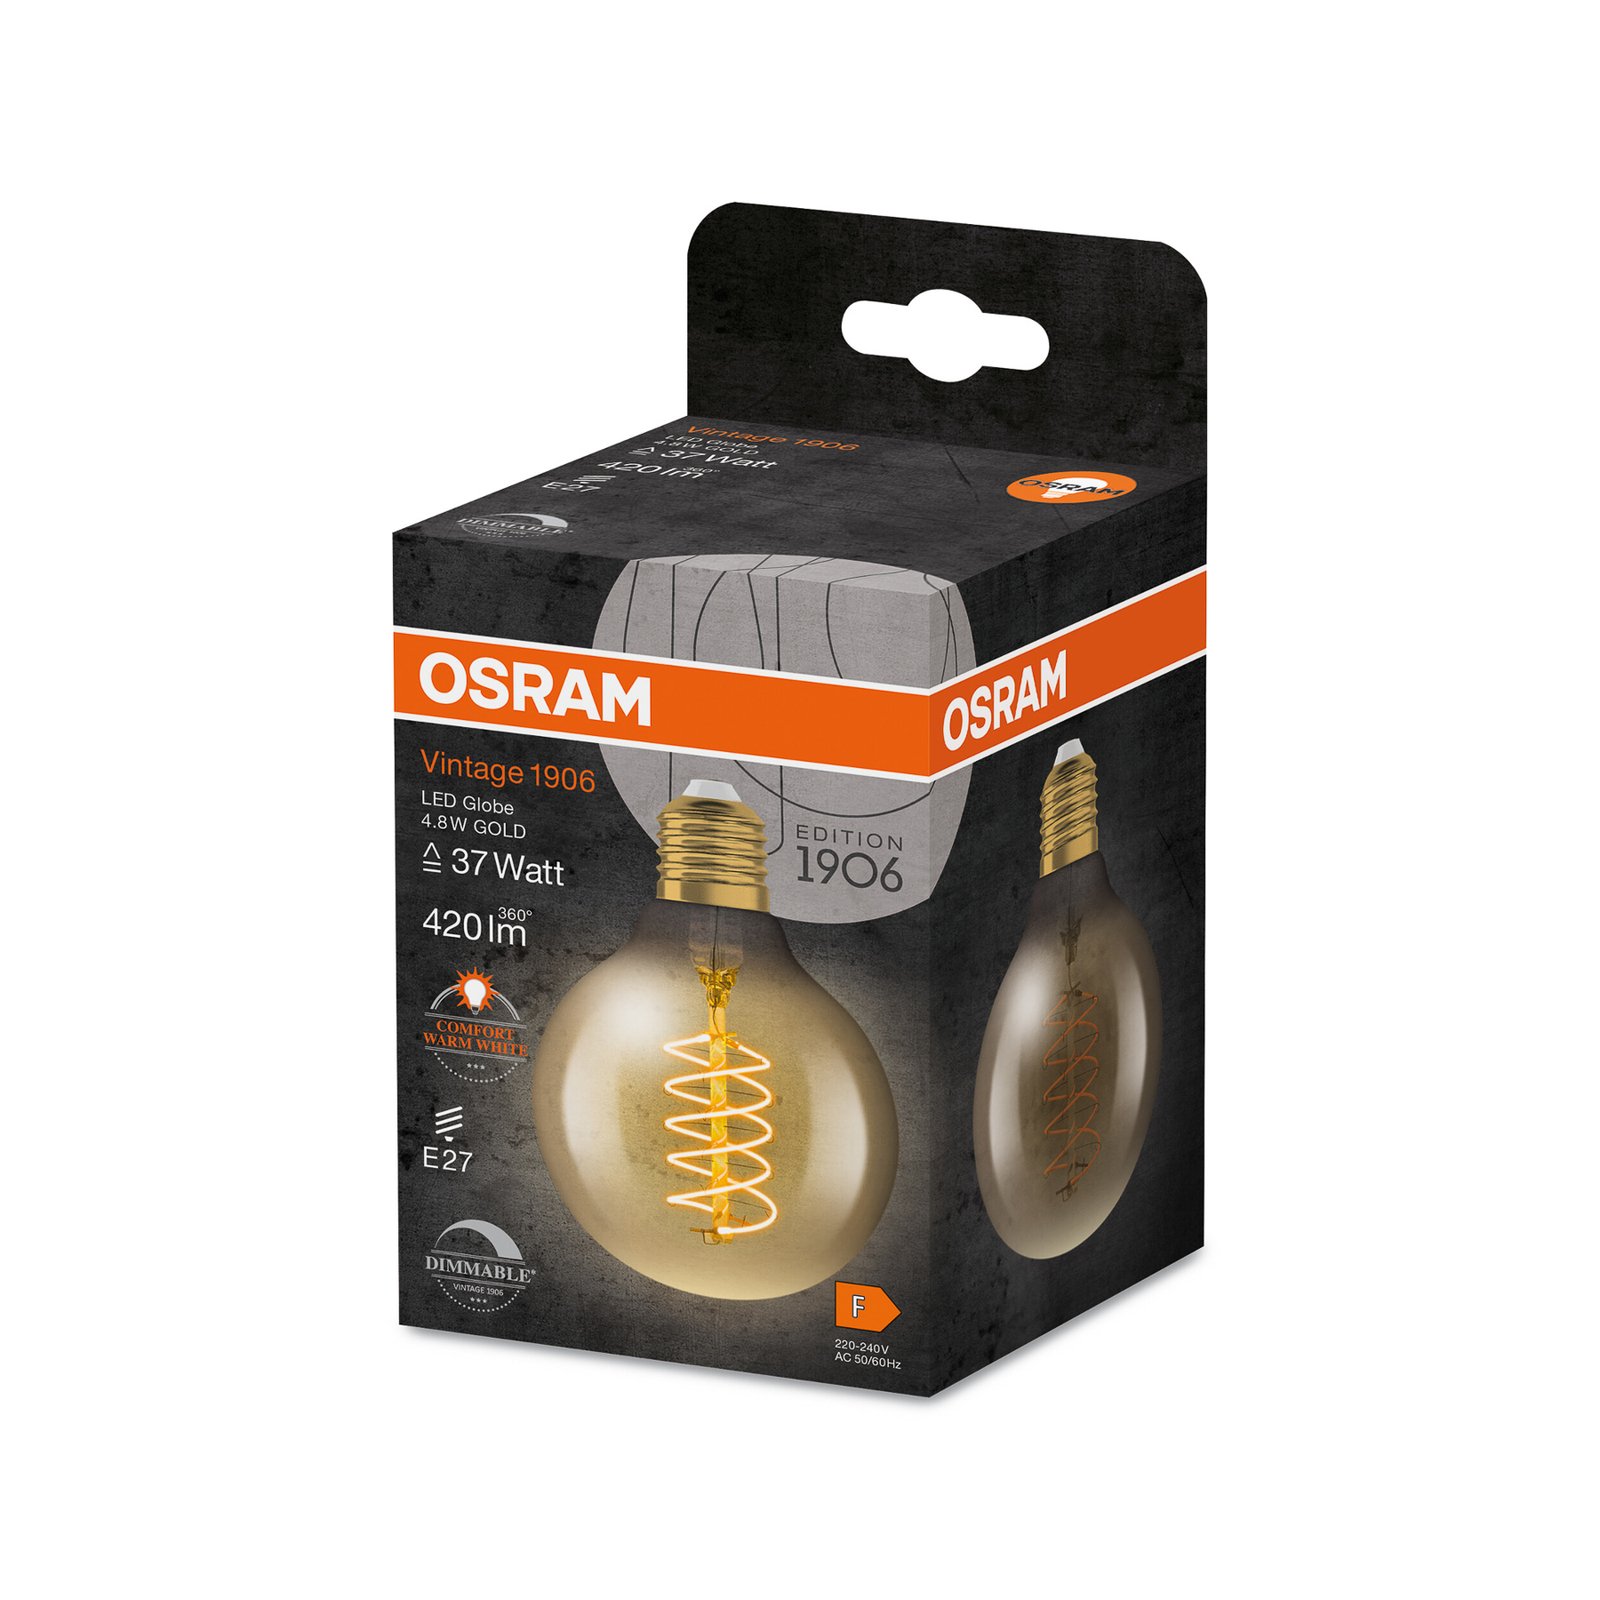 OSRAM LED Vintage 1906, G80, E27, 4.8 W, gold, 2,200 K, dimmable.